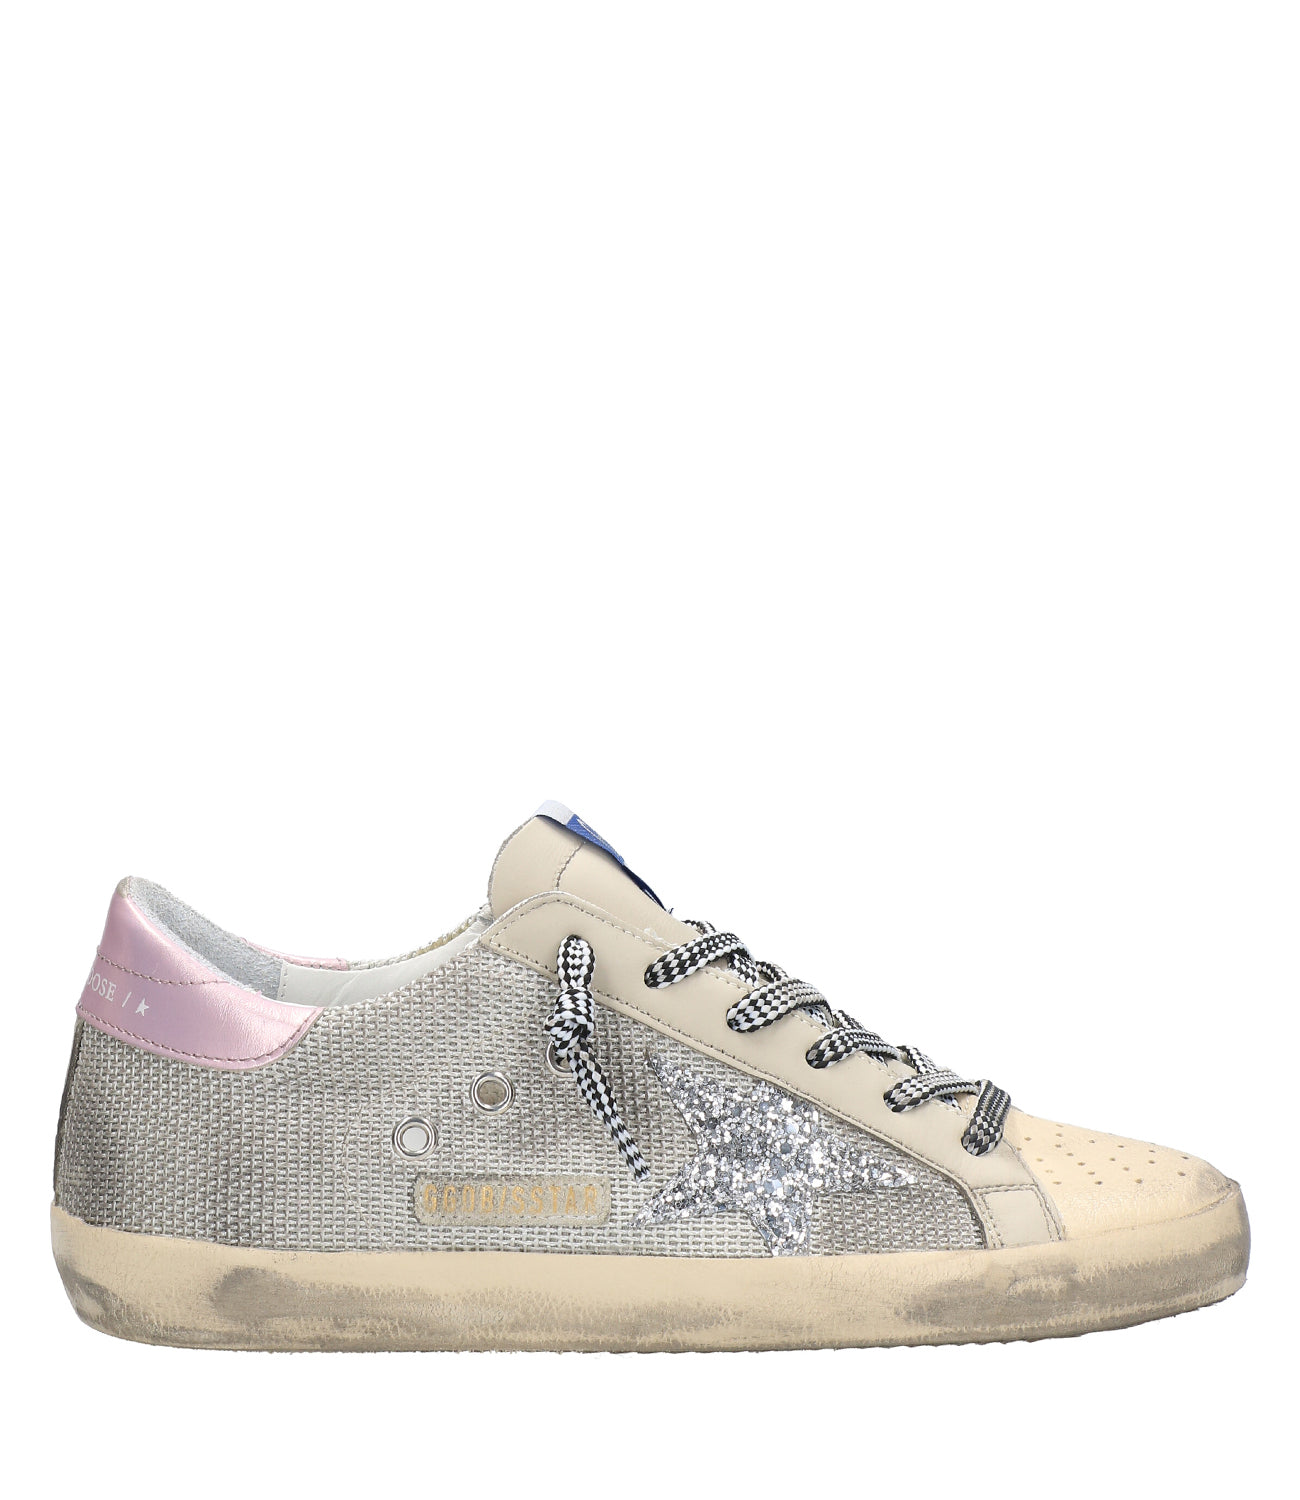 Superstar Silver and Cream Sneakers